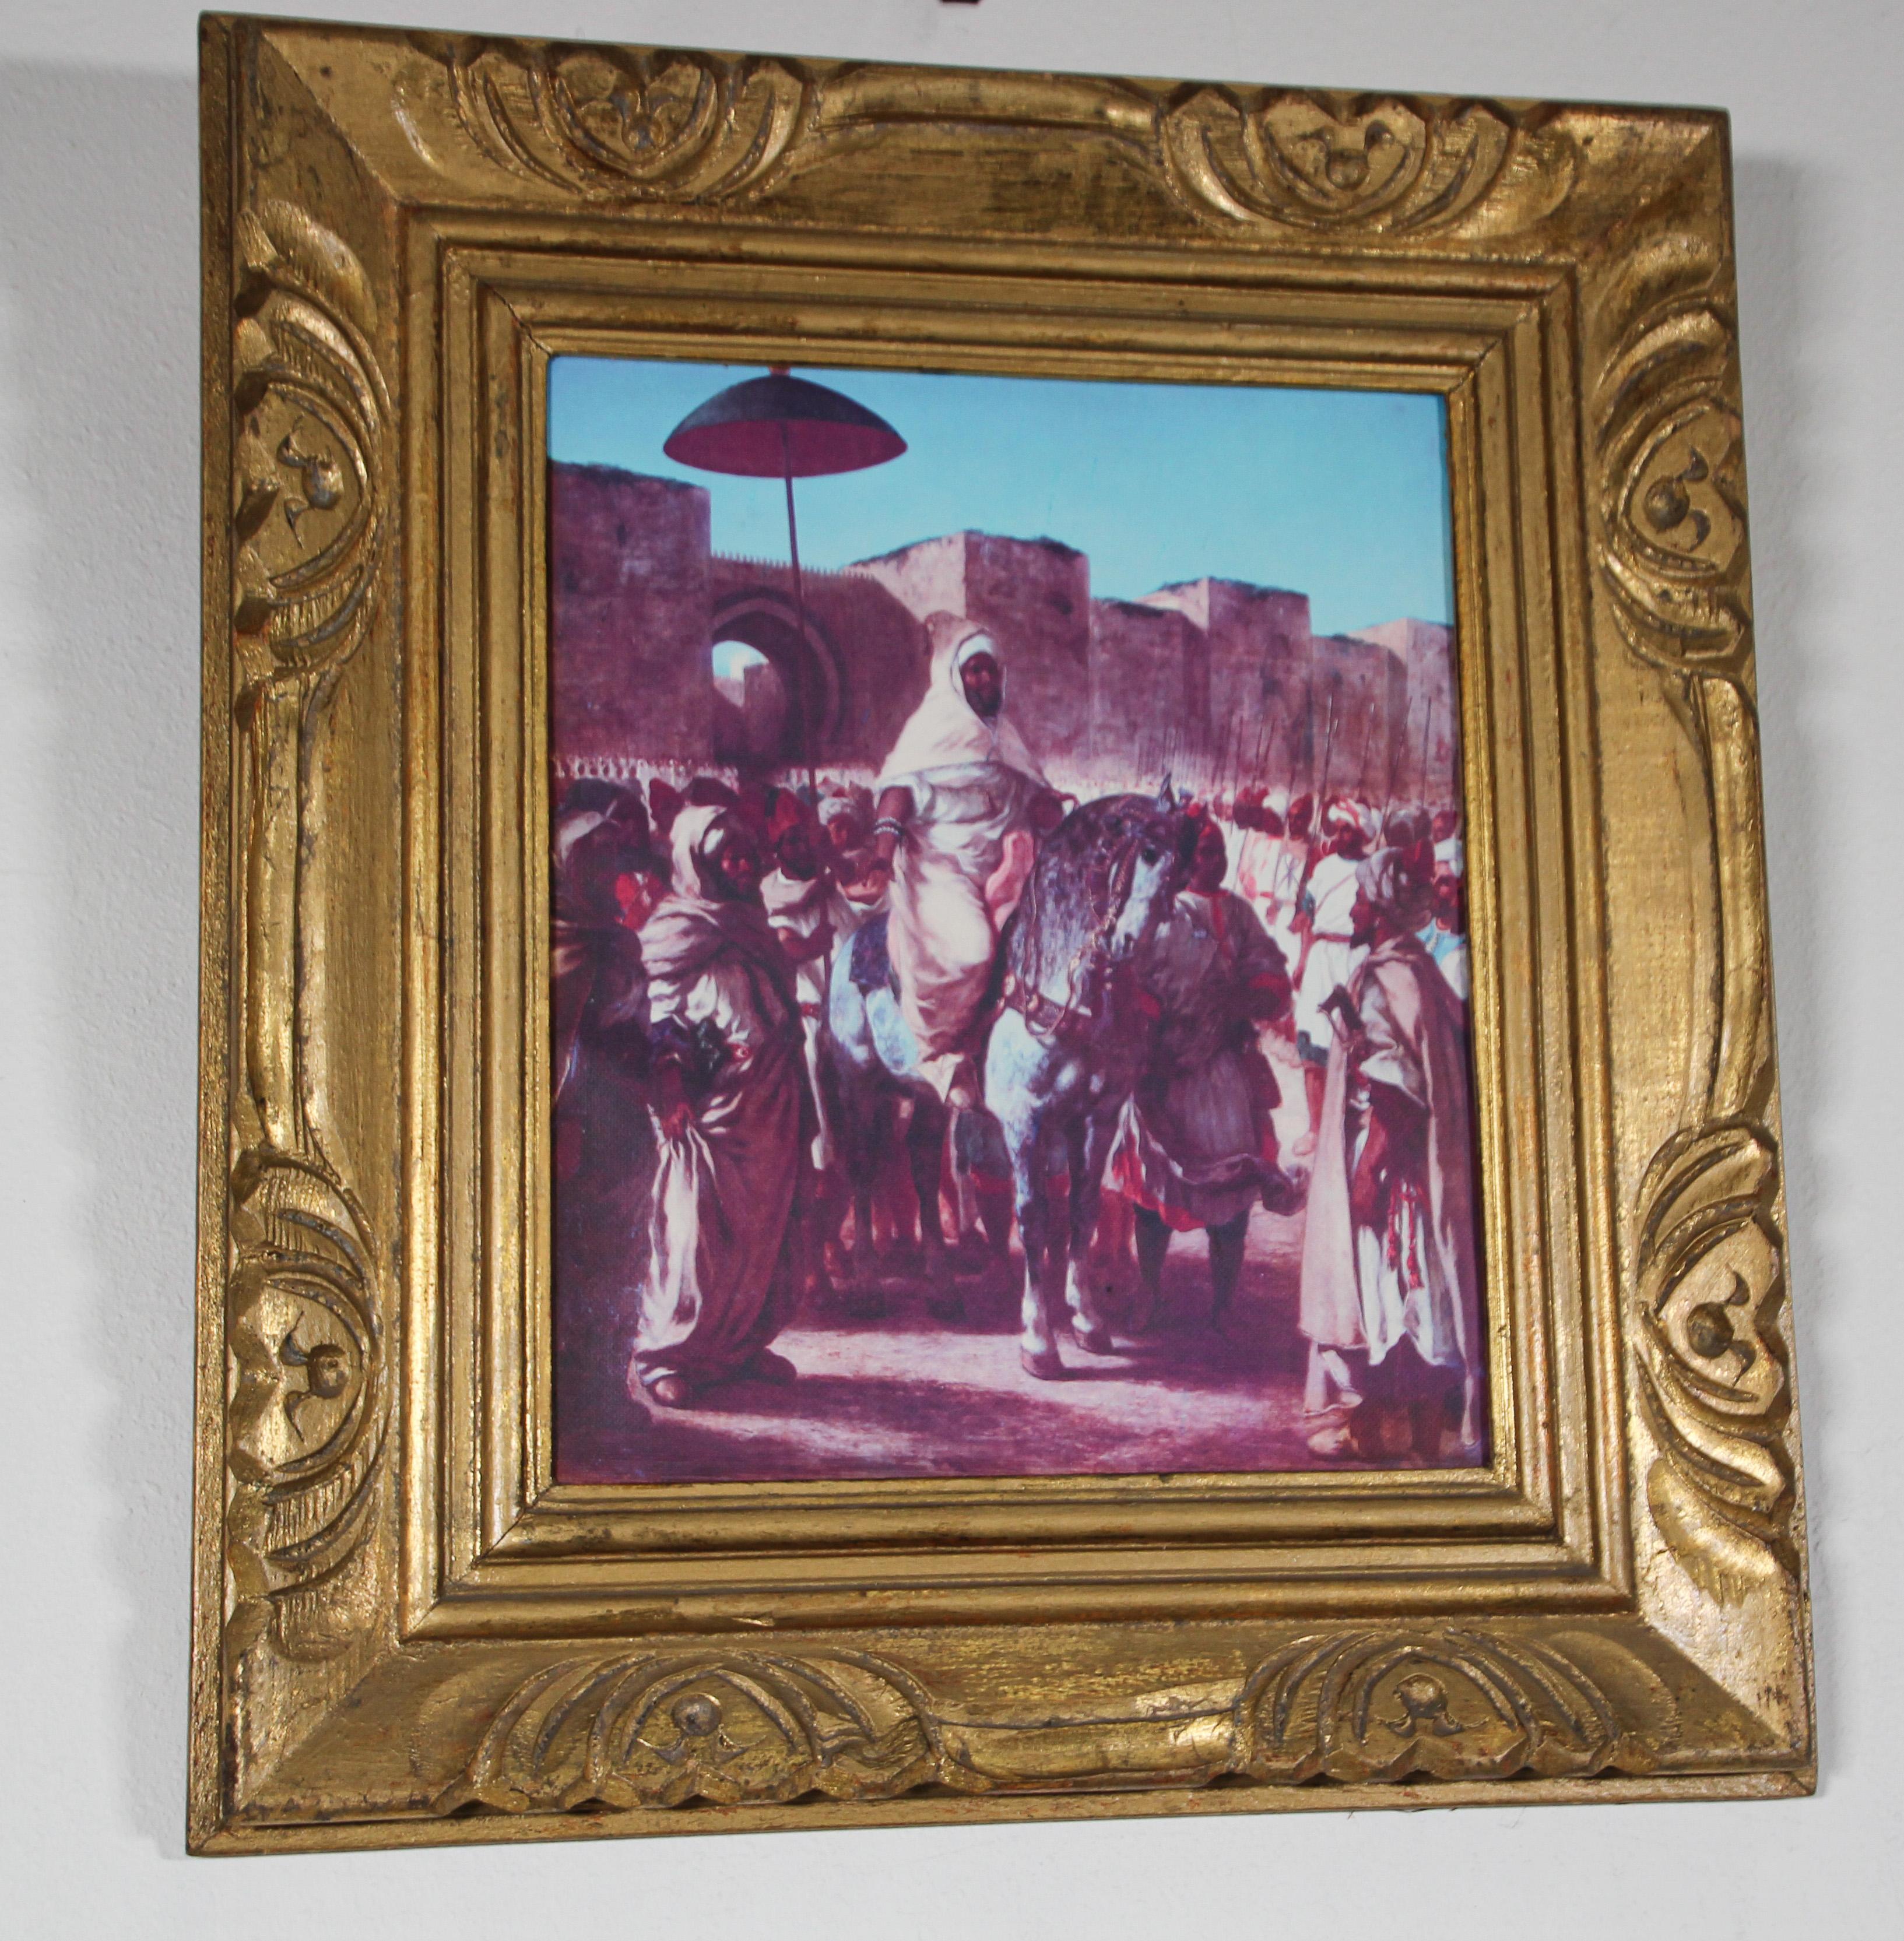 Orientalist Moroccan scene giclee painting of the King o Morocco.
French orientalist reproduction painting of Mohamed v coming back from exile with a classical wooden frame.
The frame is old the painting is a new giclee on canvas.
The